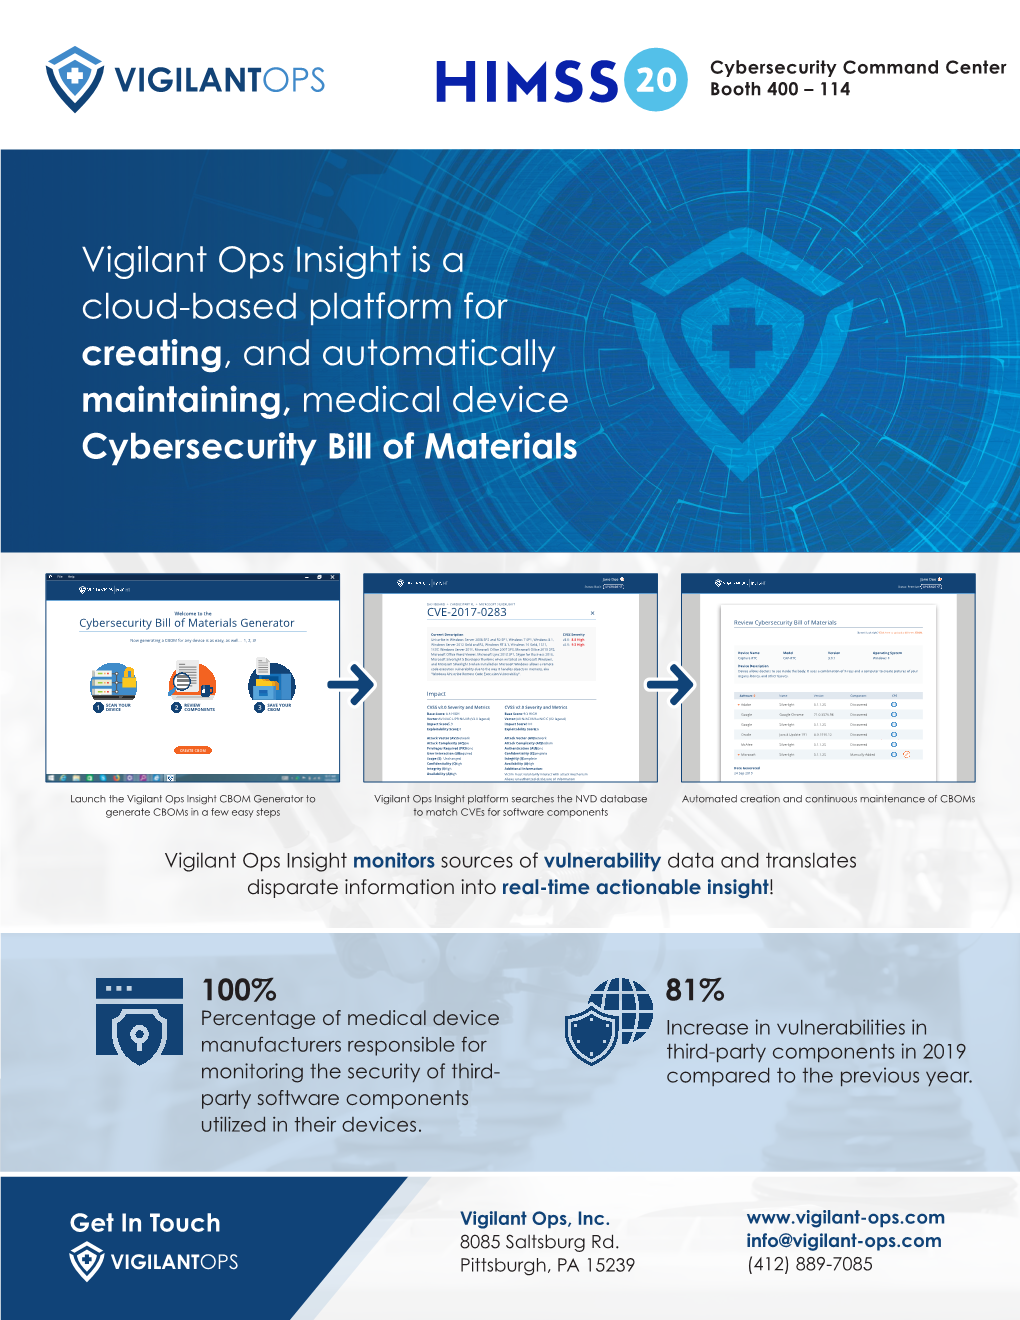 Vigilant Ops Insight Is a Cloud-Based Platform for Creating, and Automatically Maintaining, Medical Device Cybersecurity Bill of Materials